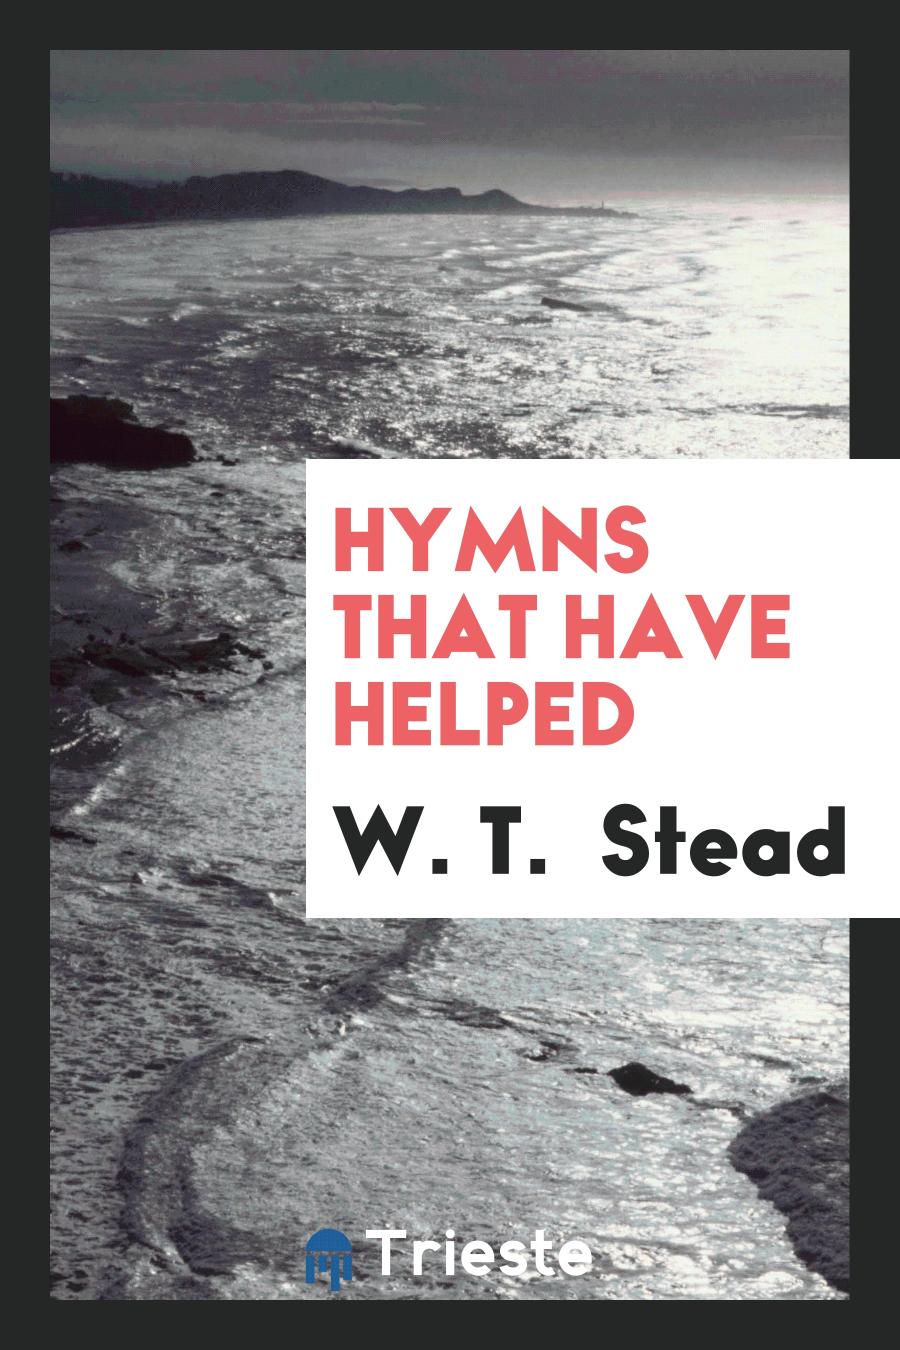 Hymns that Have Helped